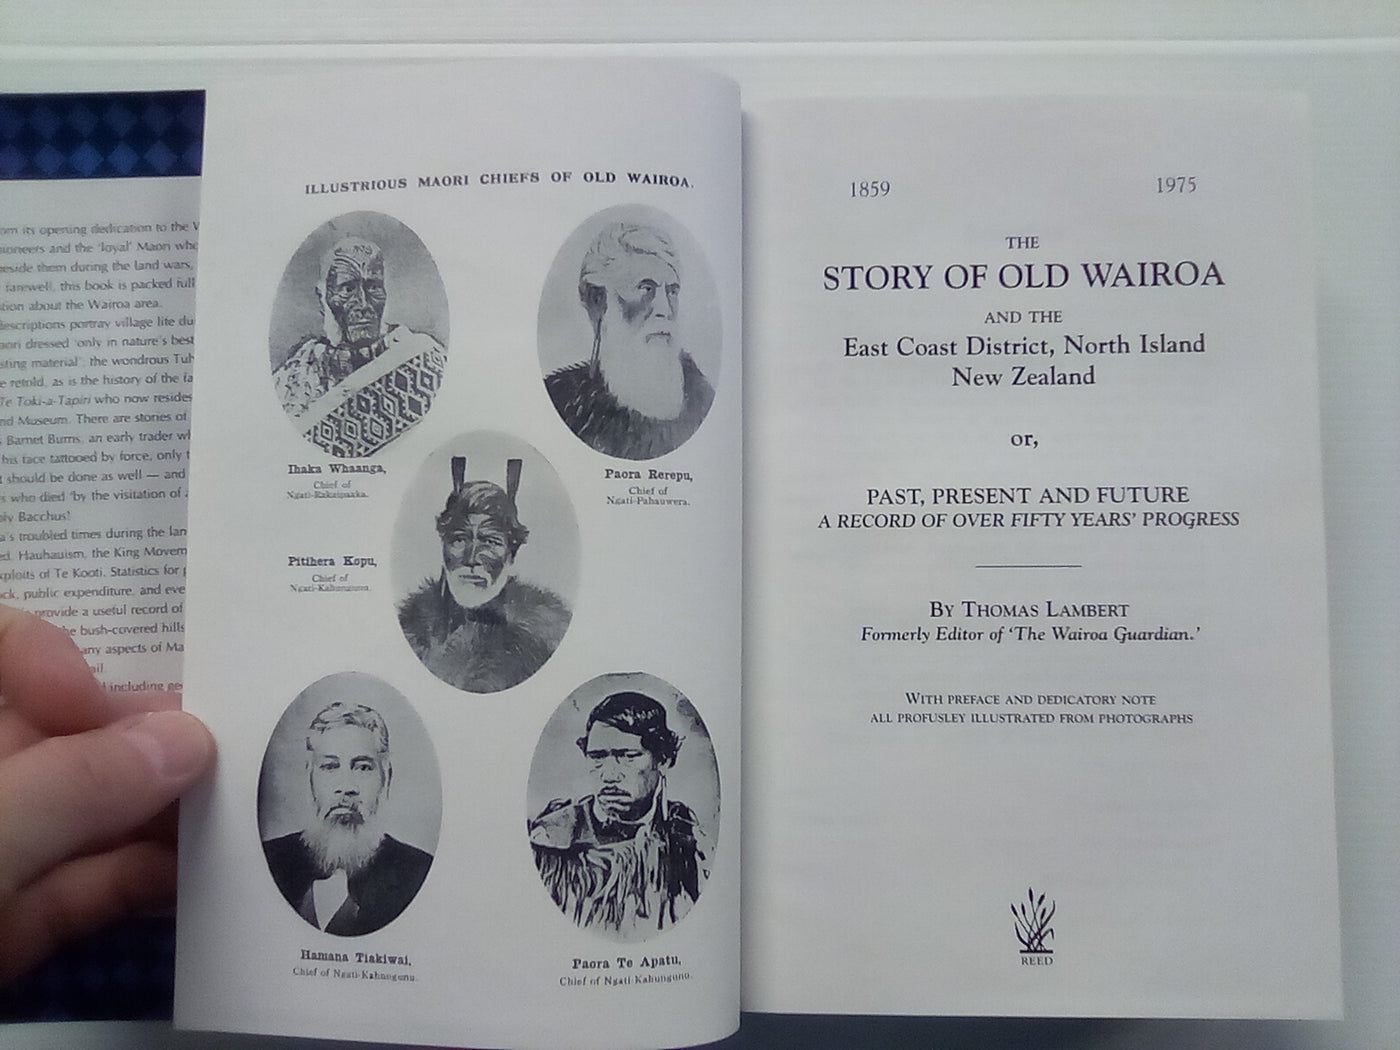 The Story of Old Wairoa and the East Coast (1925) by T. Lambert